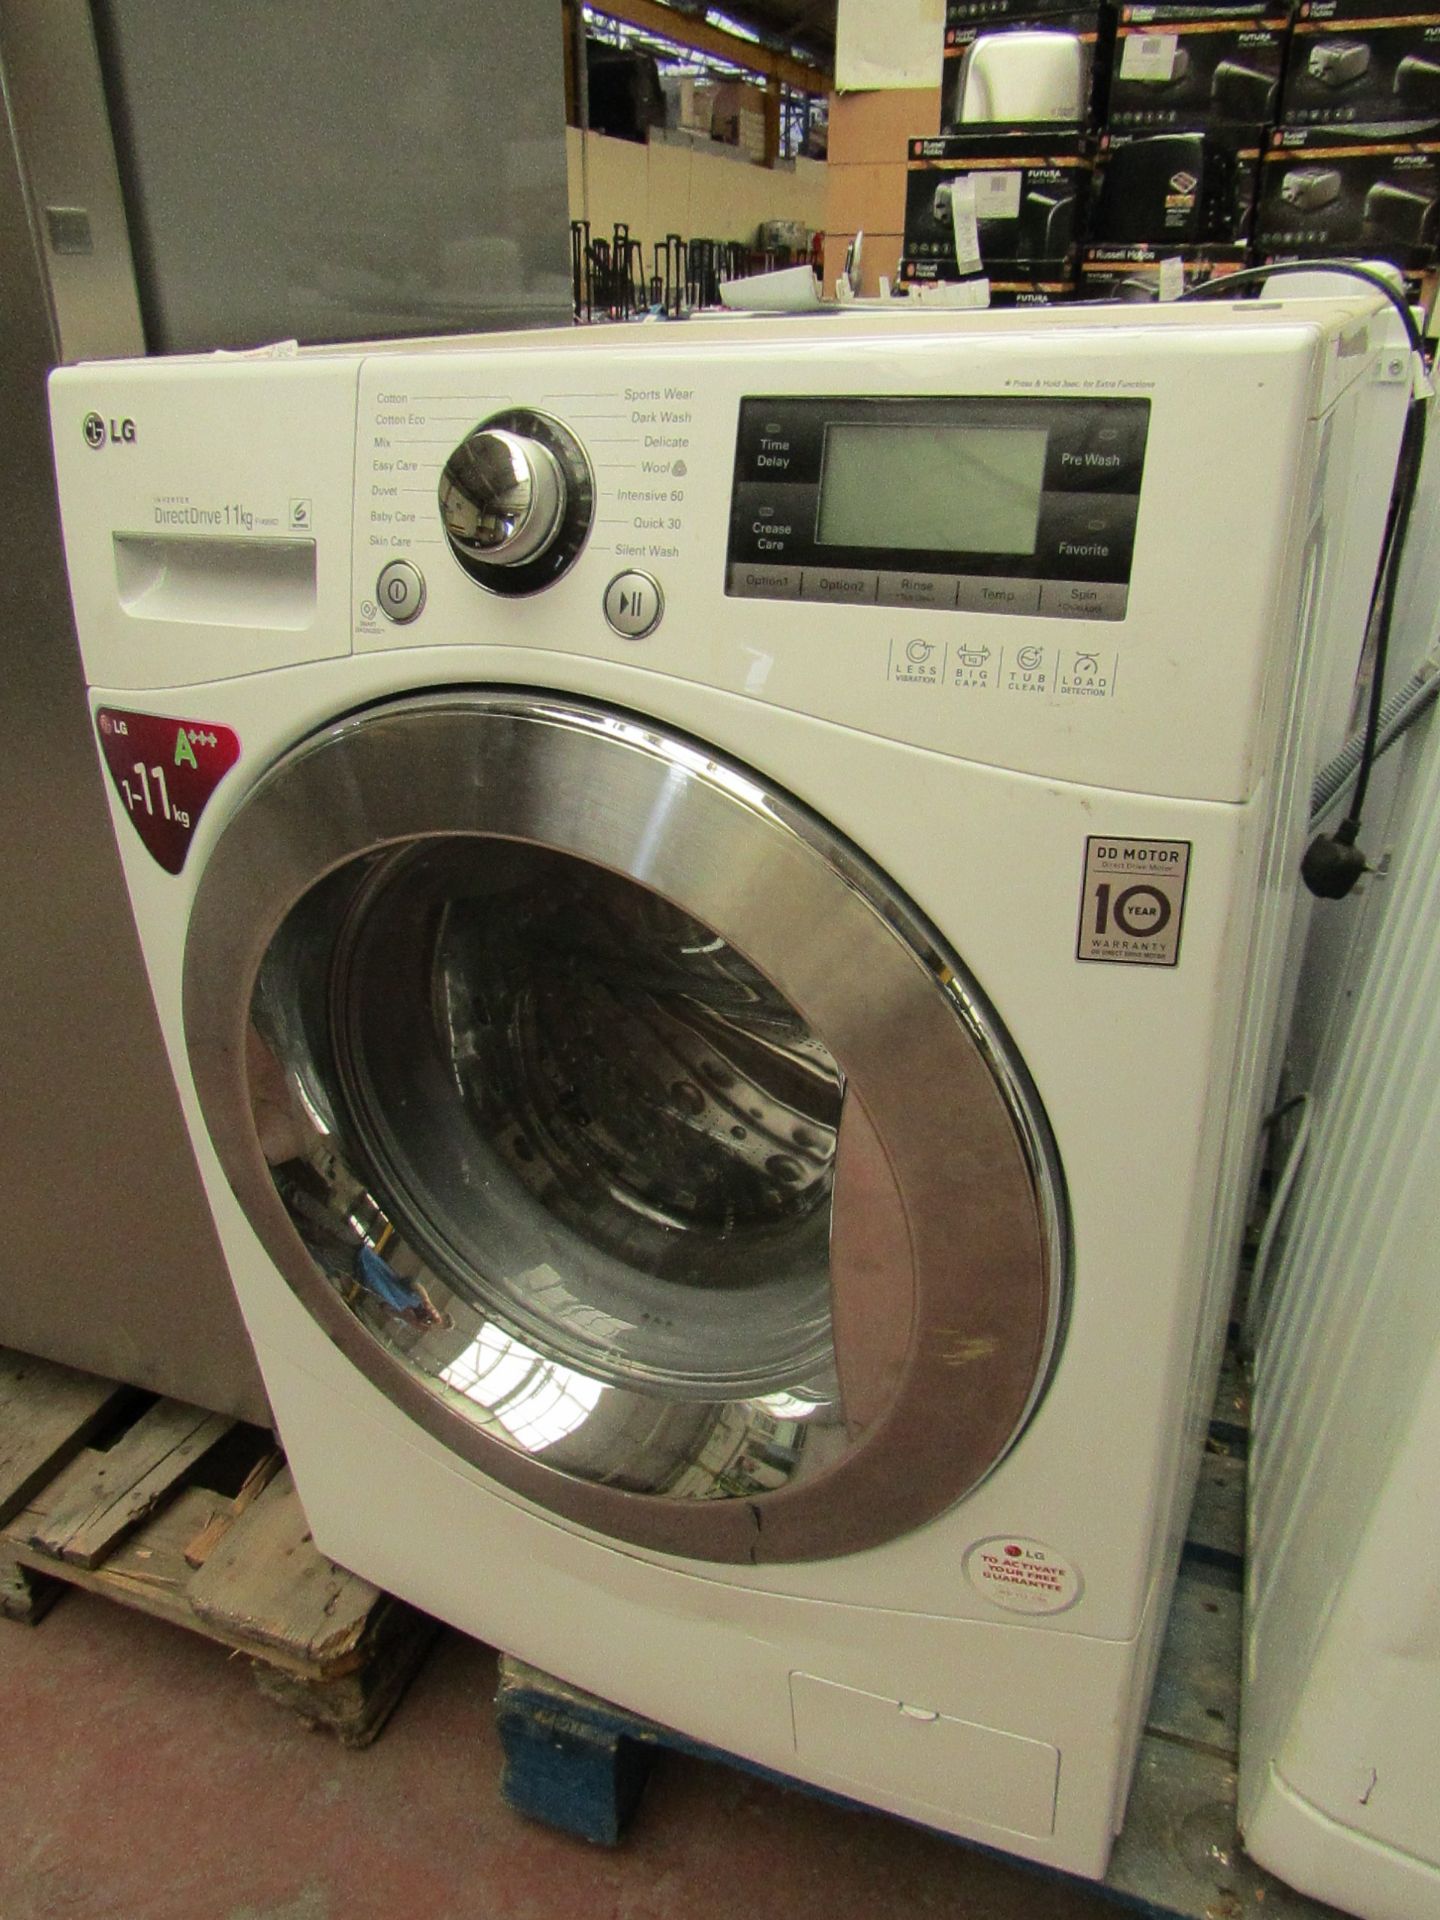 LG F1495KD Inverter Direct Drive 11kg washing machine, has clear damage to the door and a few dents.